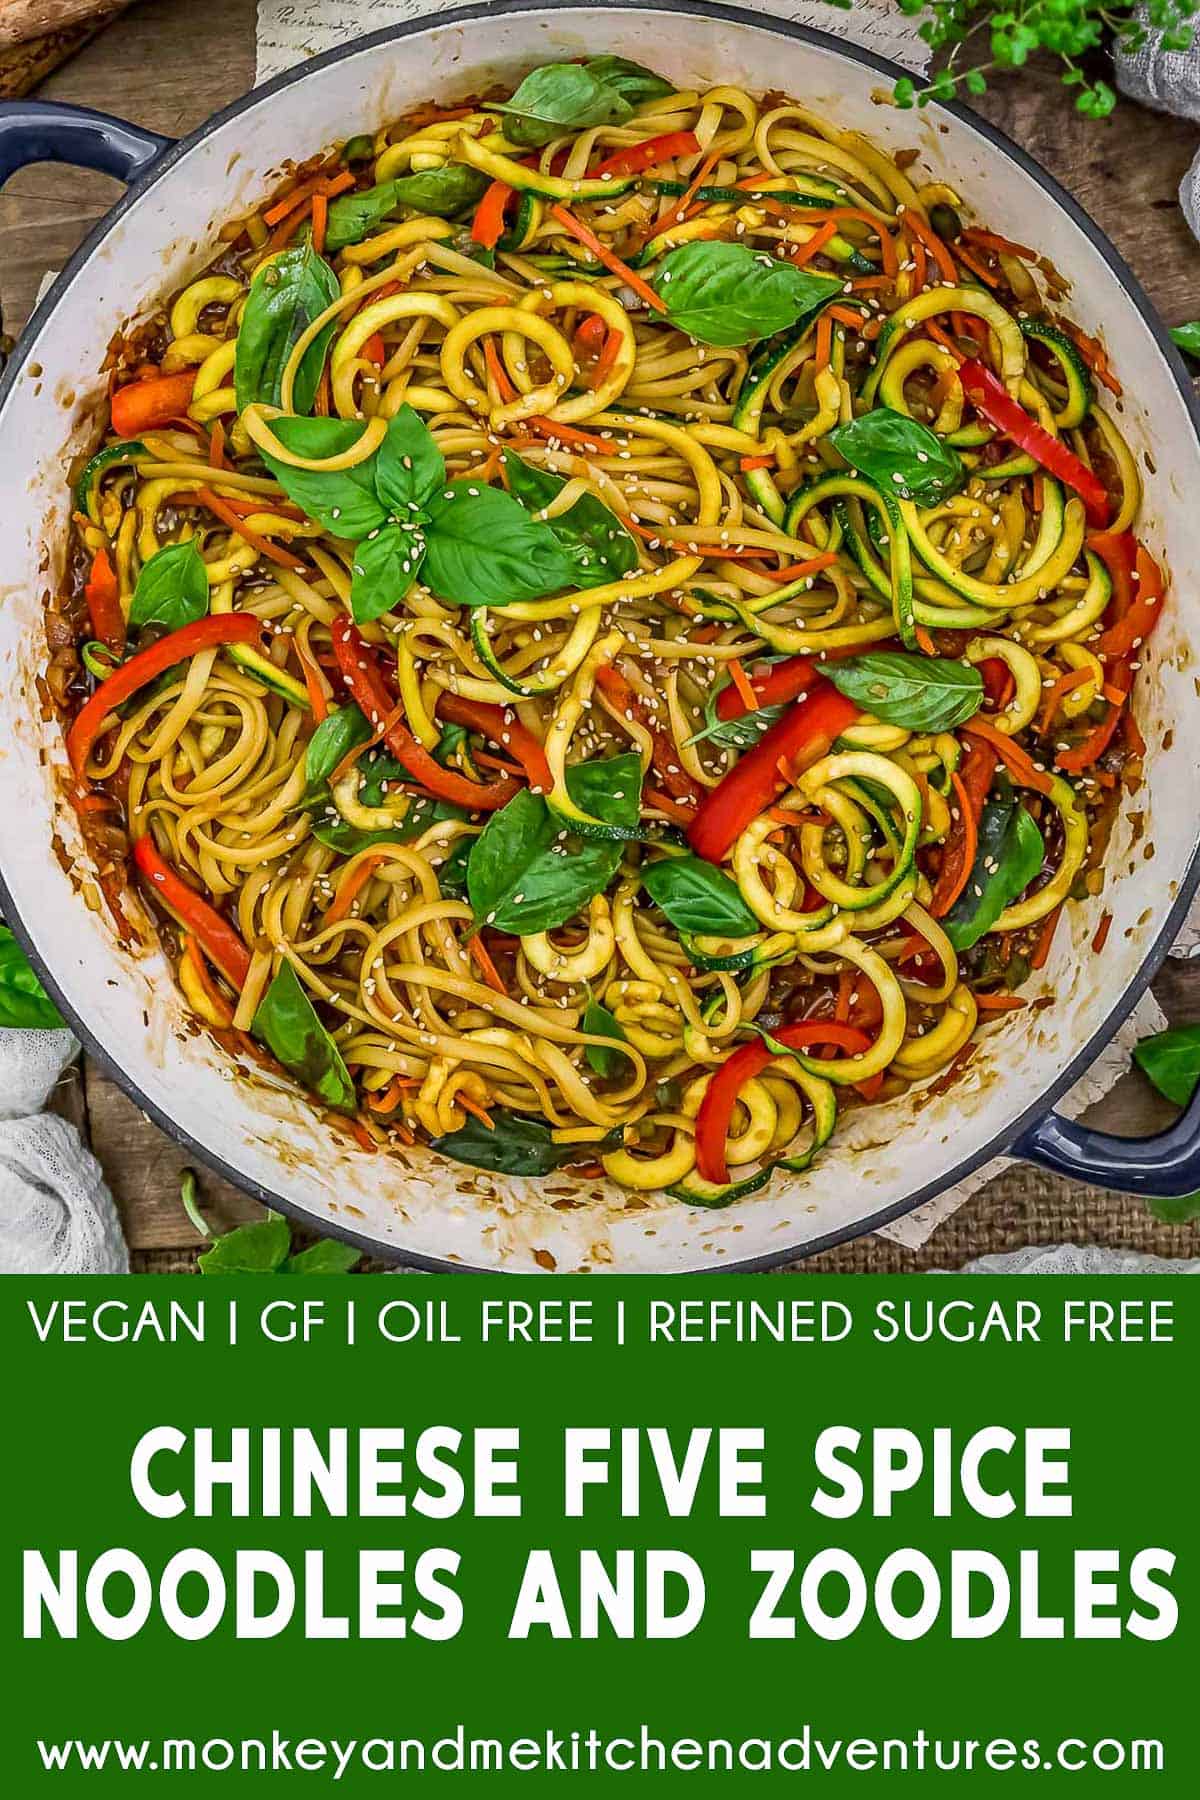 Chinese Five Spice Noodles and Zoodles with text description